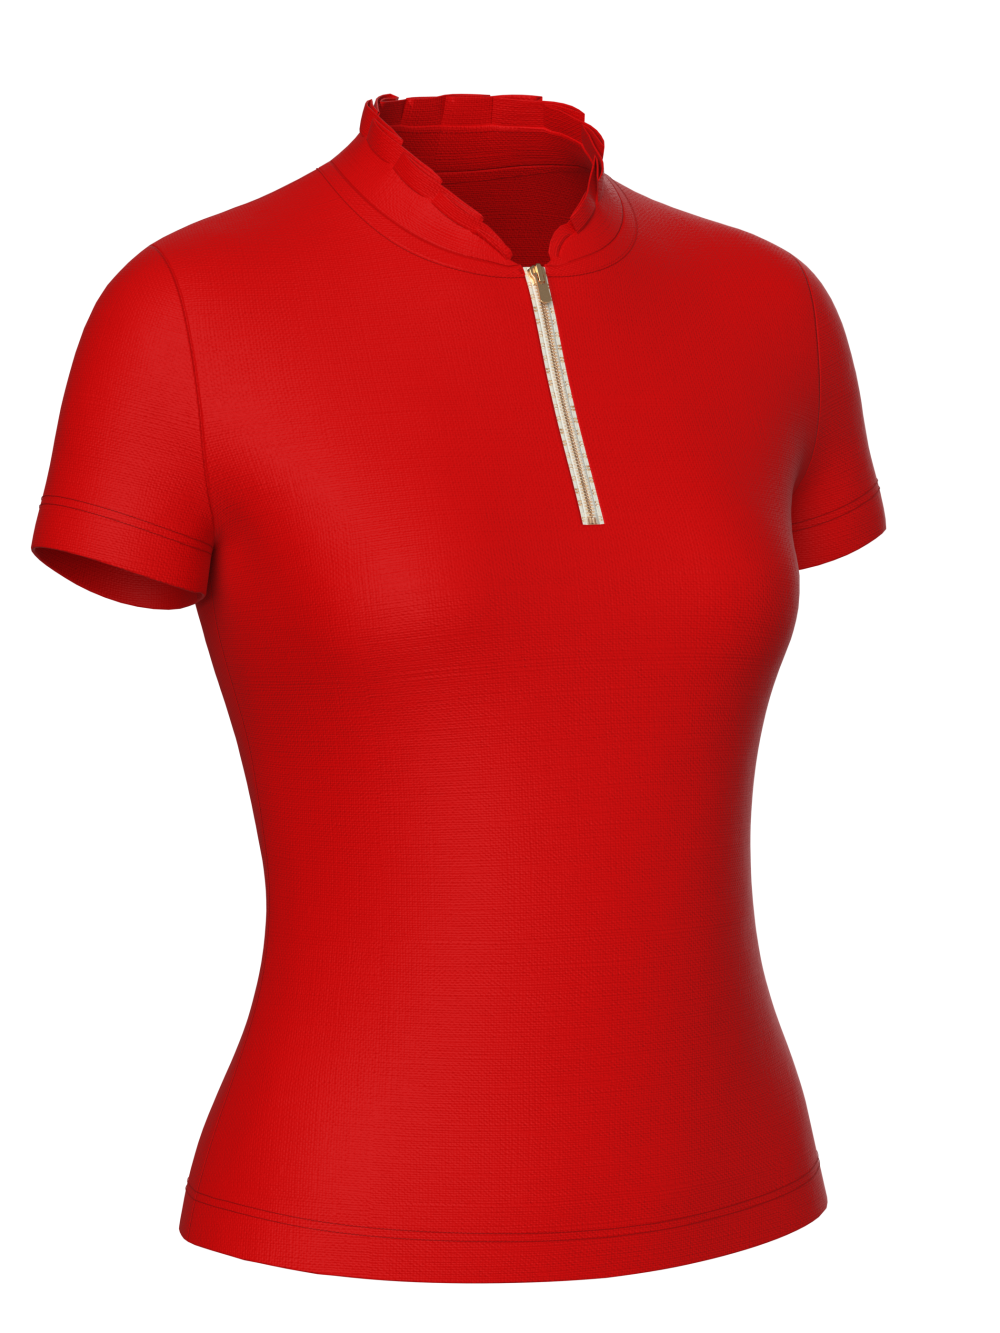 CHAMBERY_Signature Golf Shirt with short sleeves